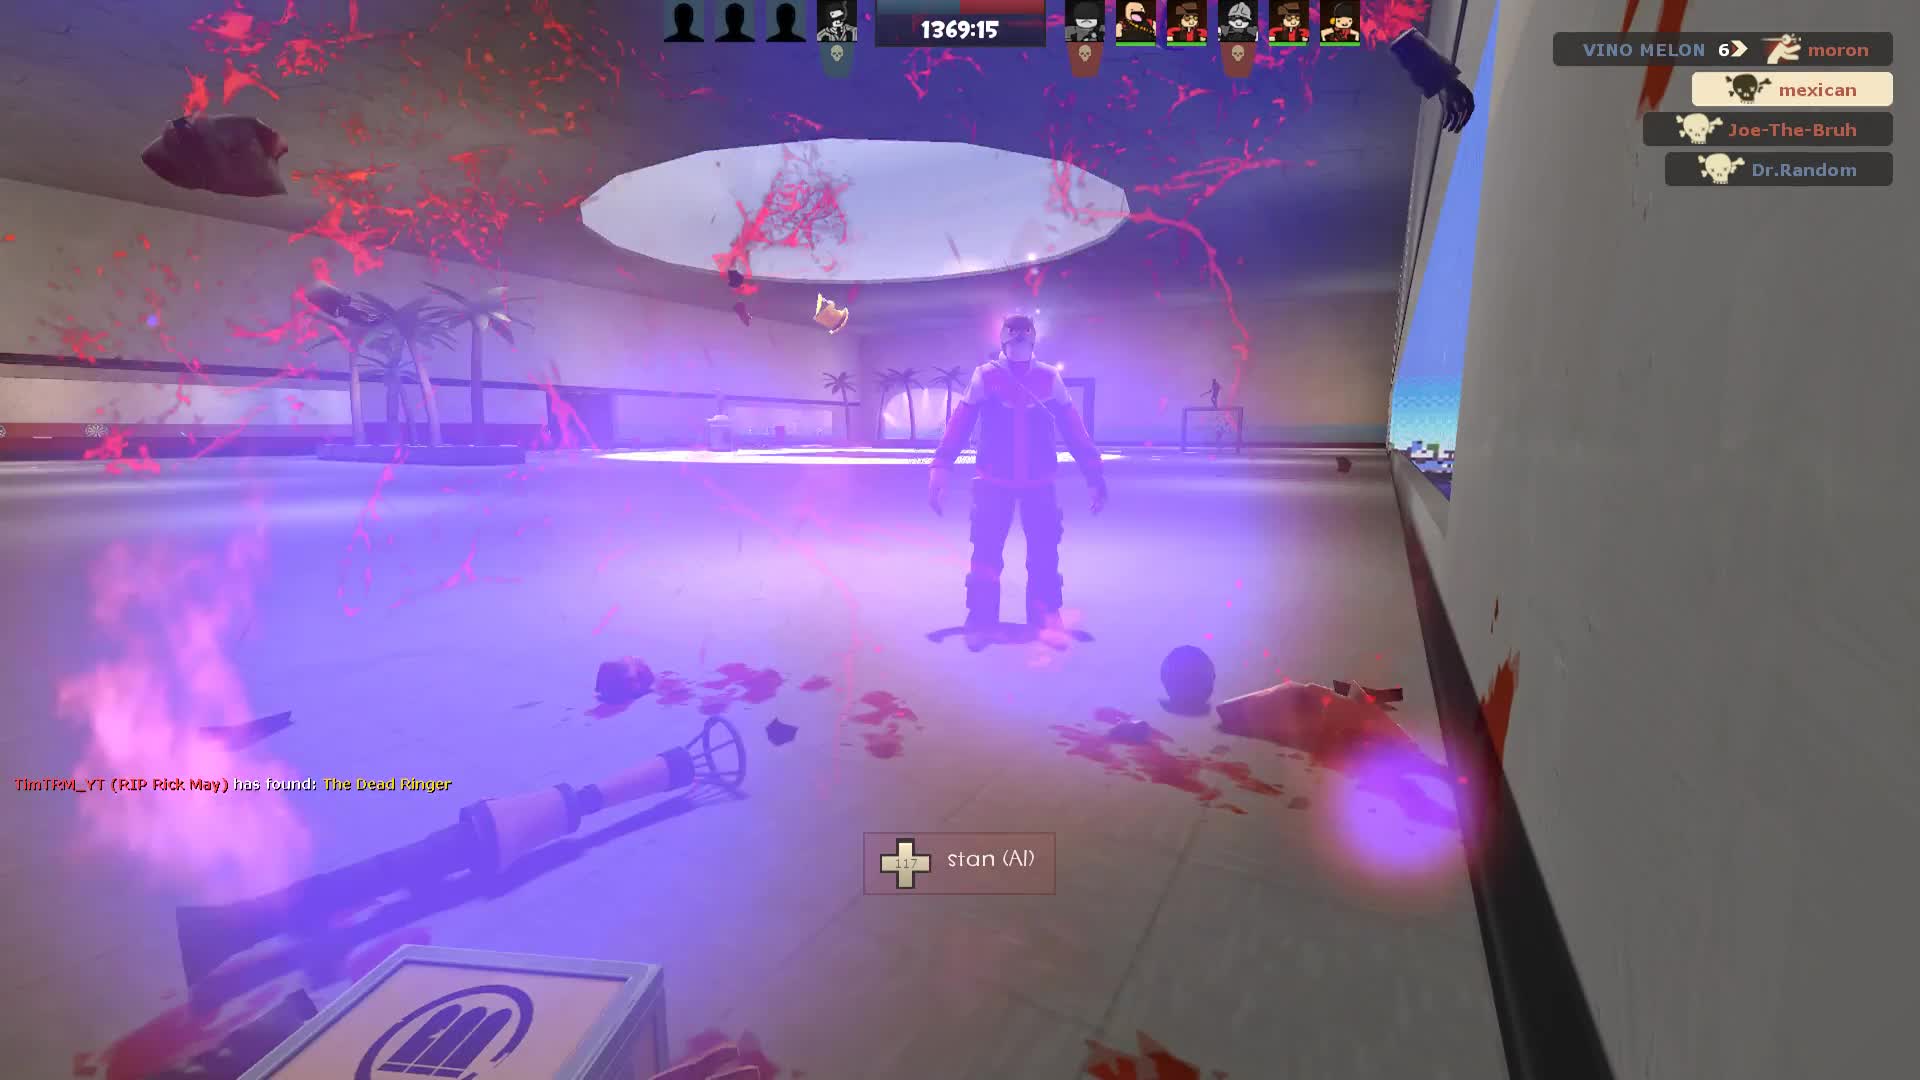 extremely professional tf2 gameplay